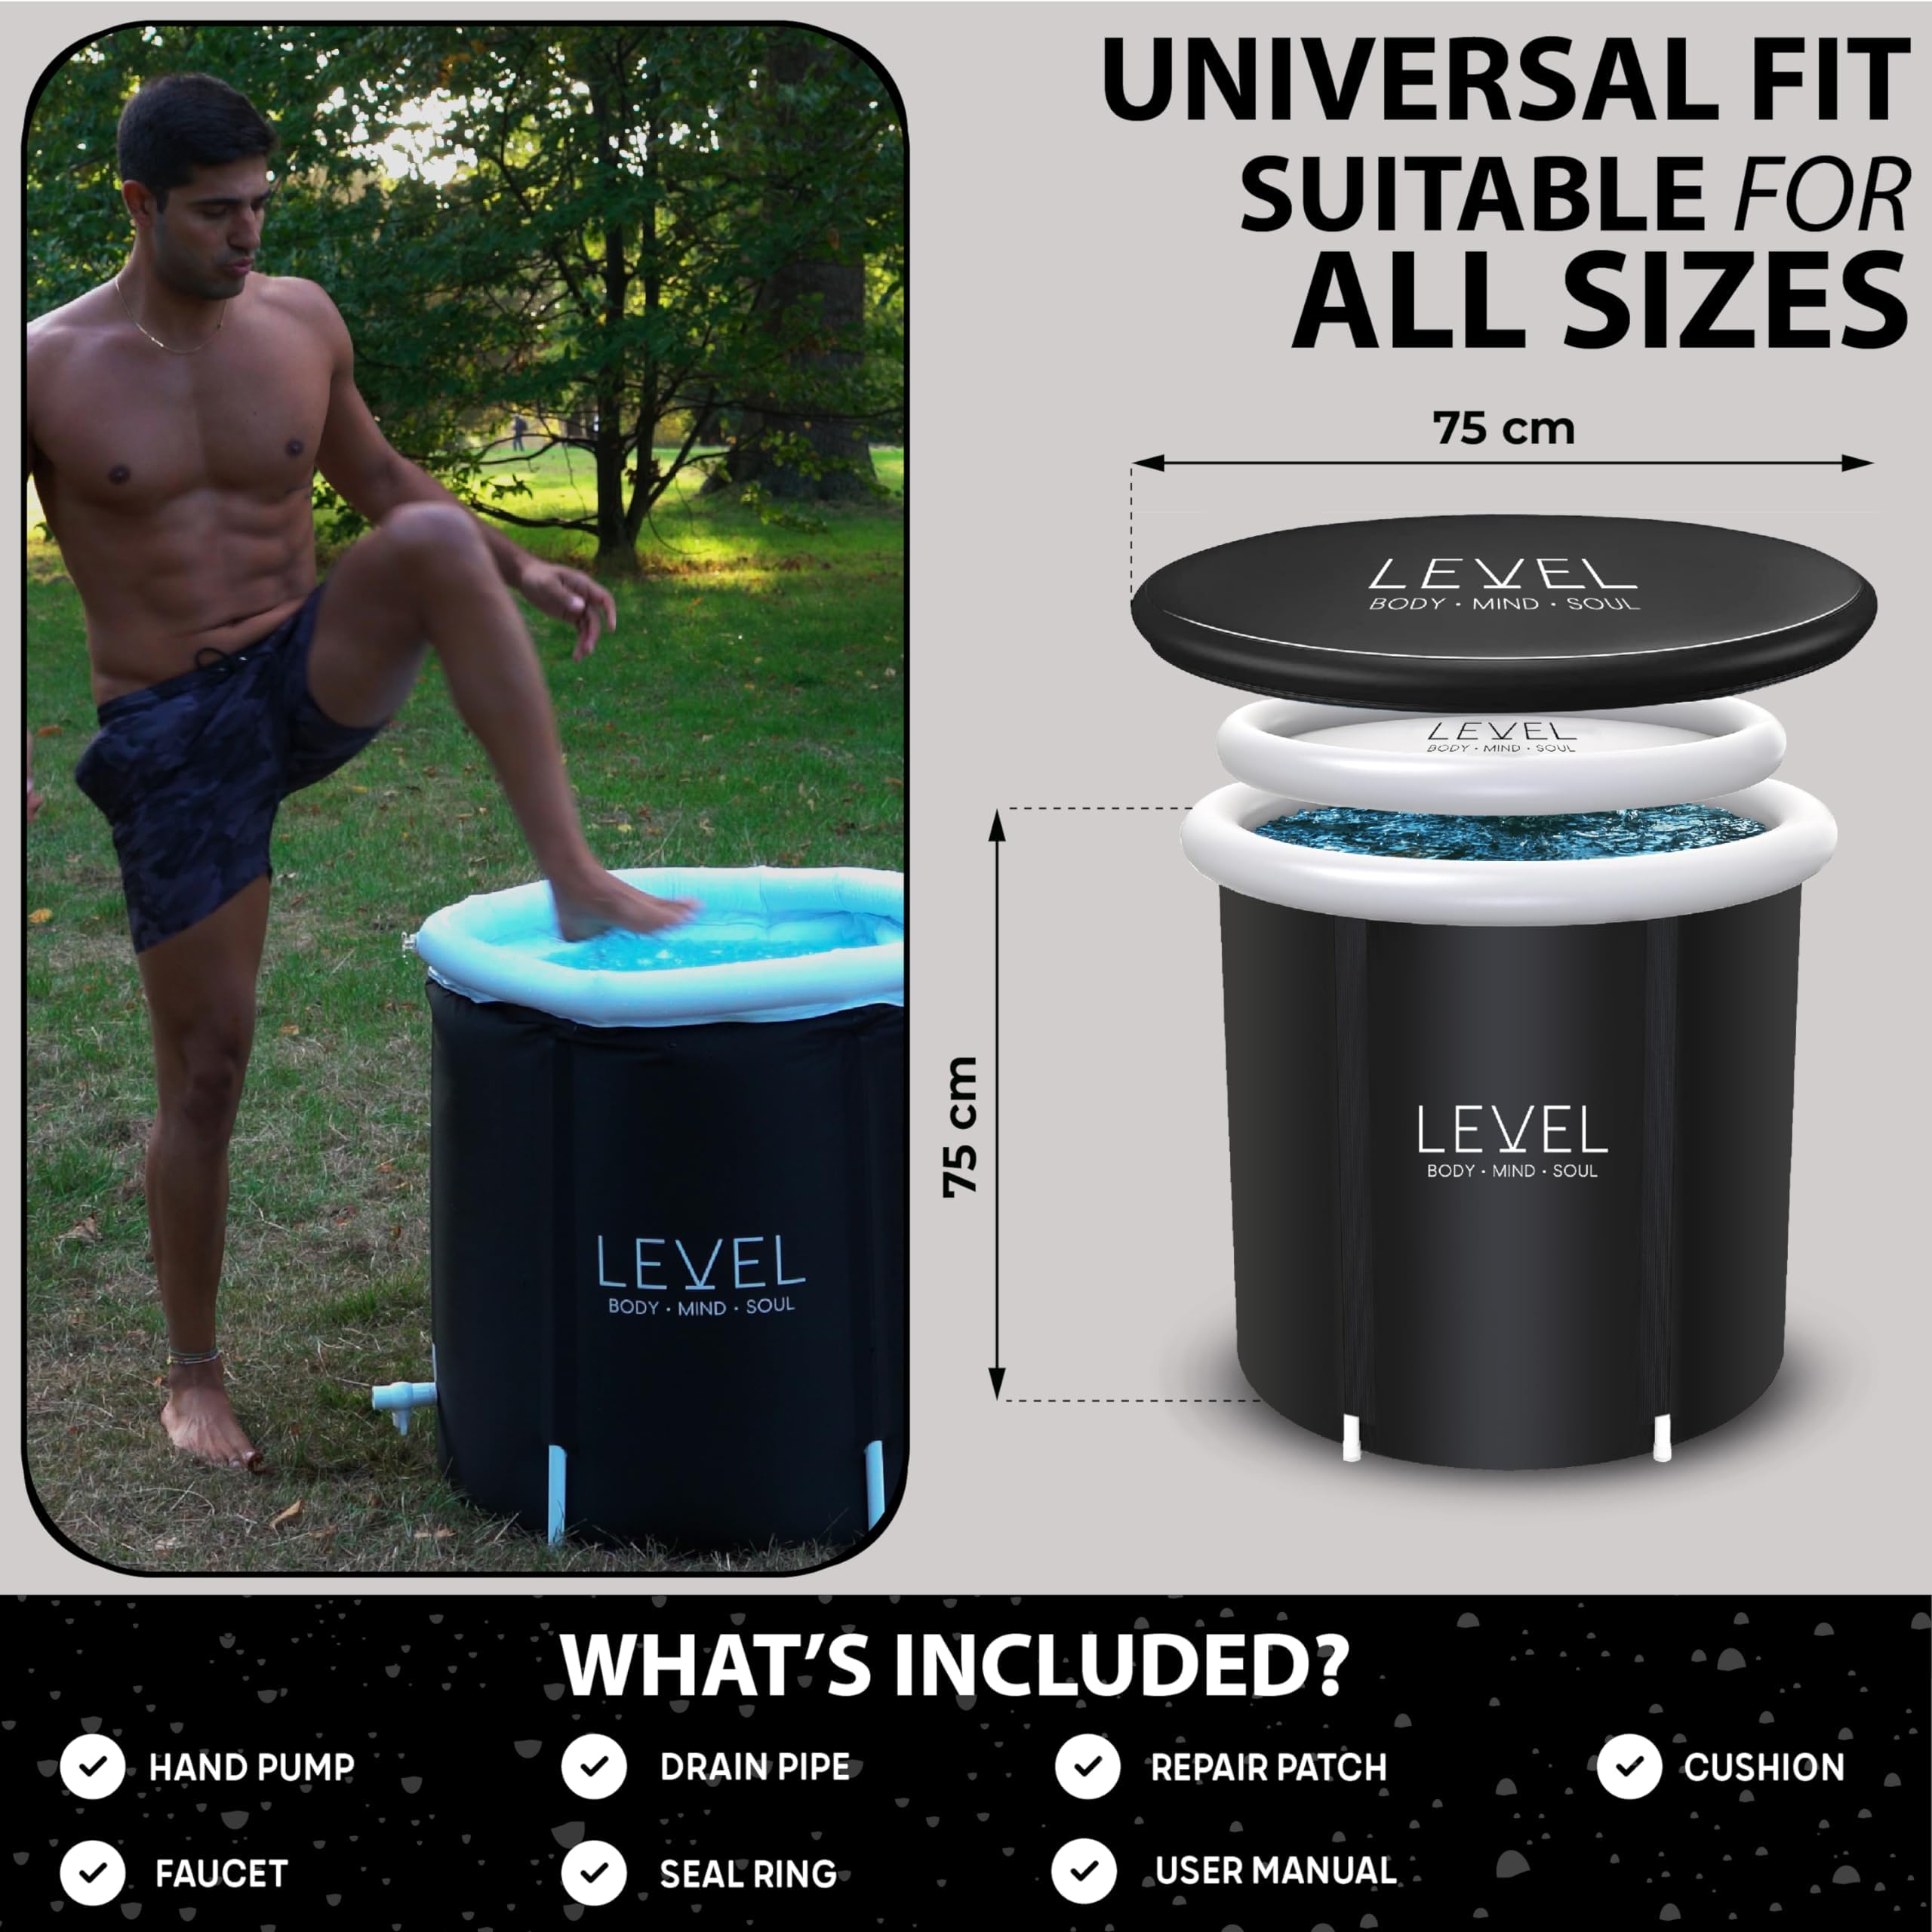 Level Body Mind Soul - Portable Ice Bath with Cover included - Ice Bath for athletes, post-workout recovery Cold Therapy - Can help improve Sleep and your general Wellbeing - 29x29 Inches